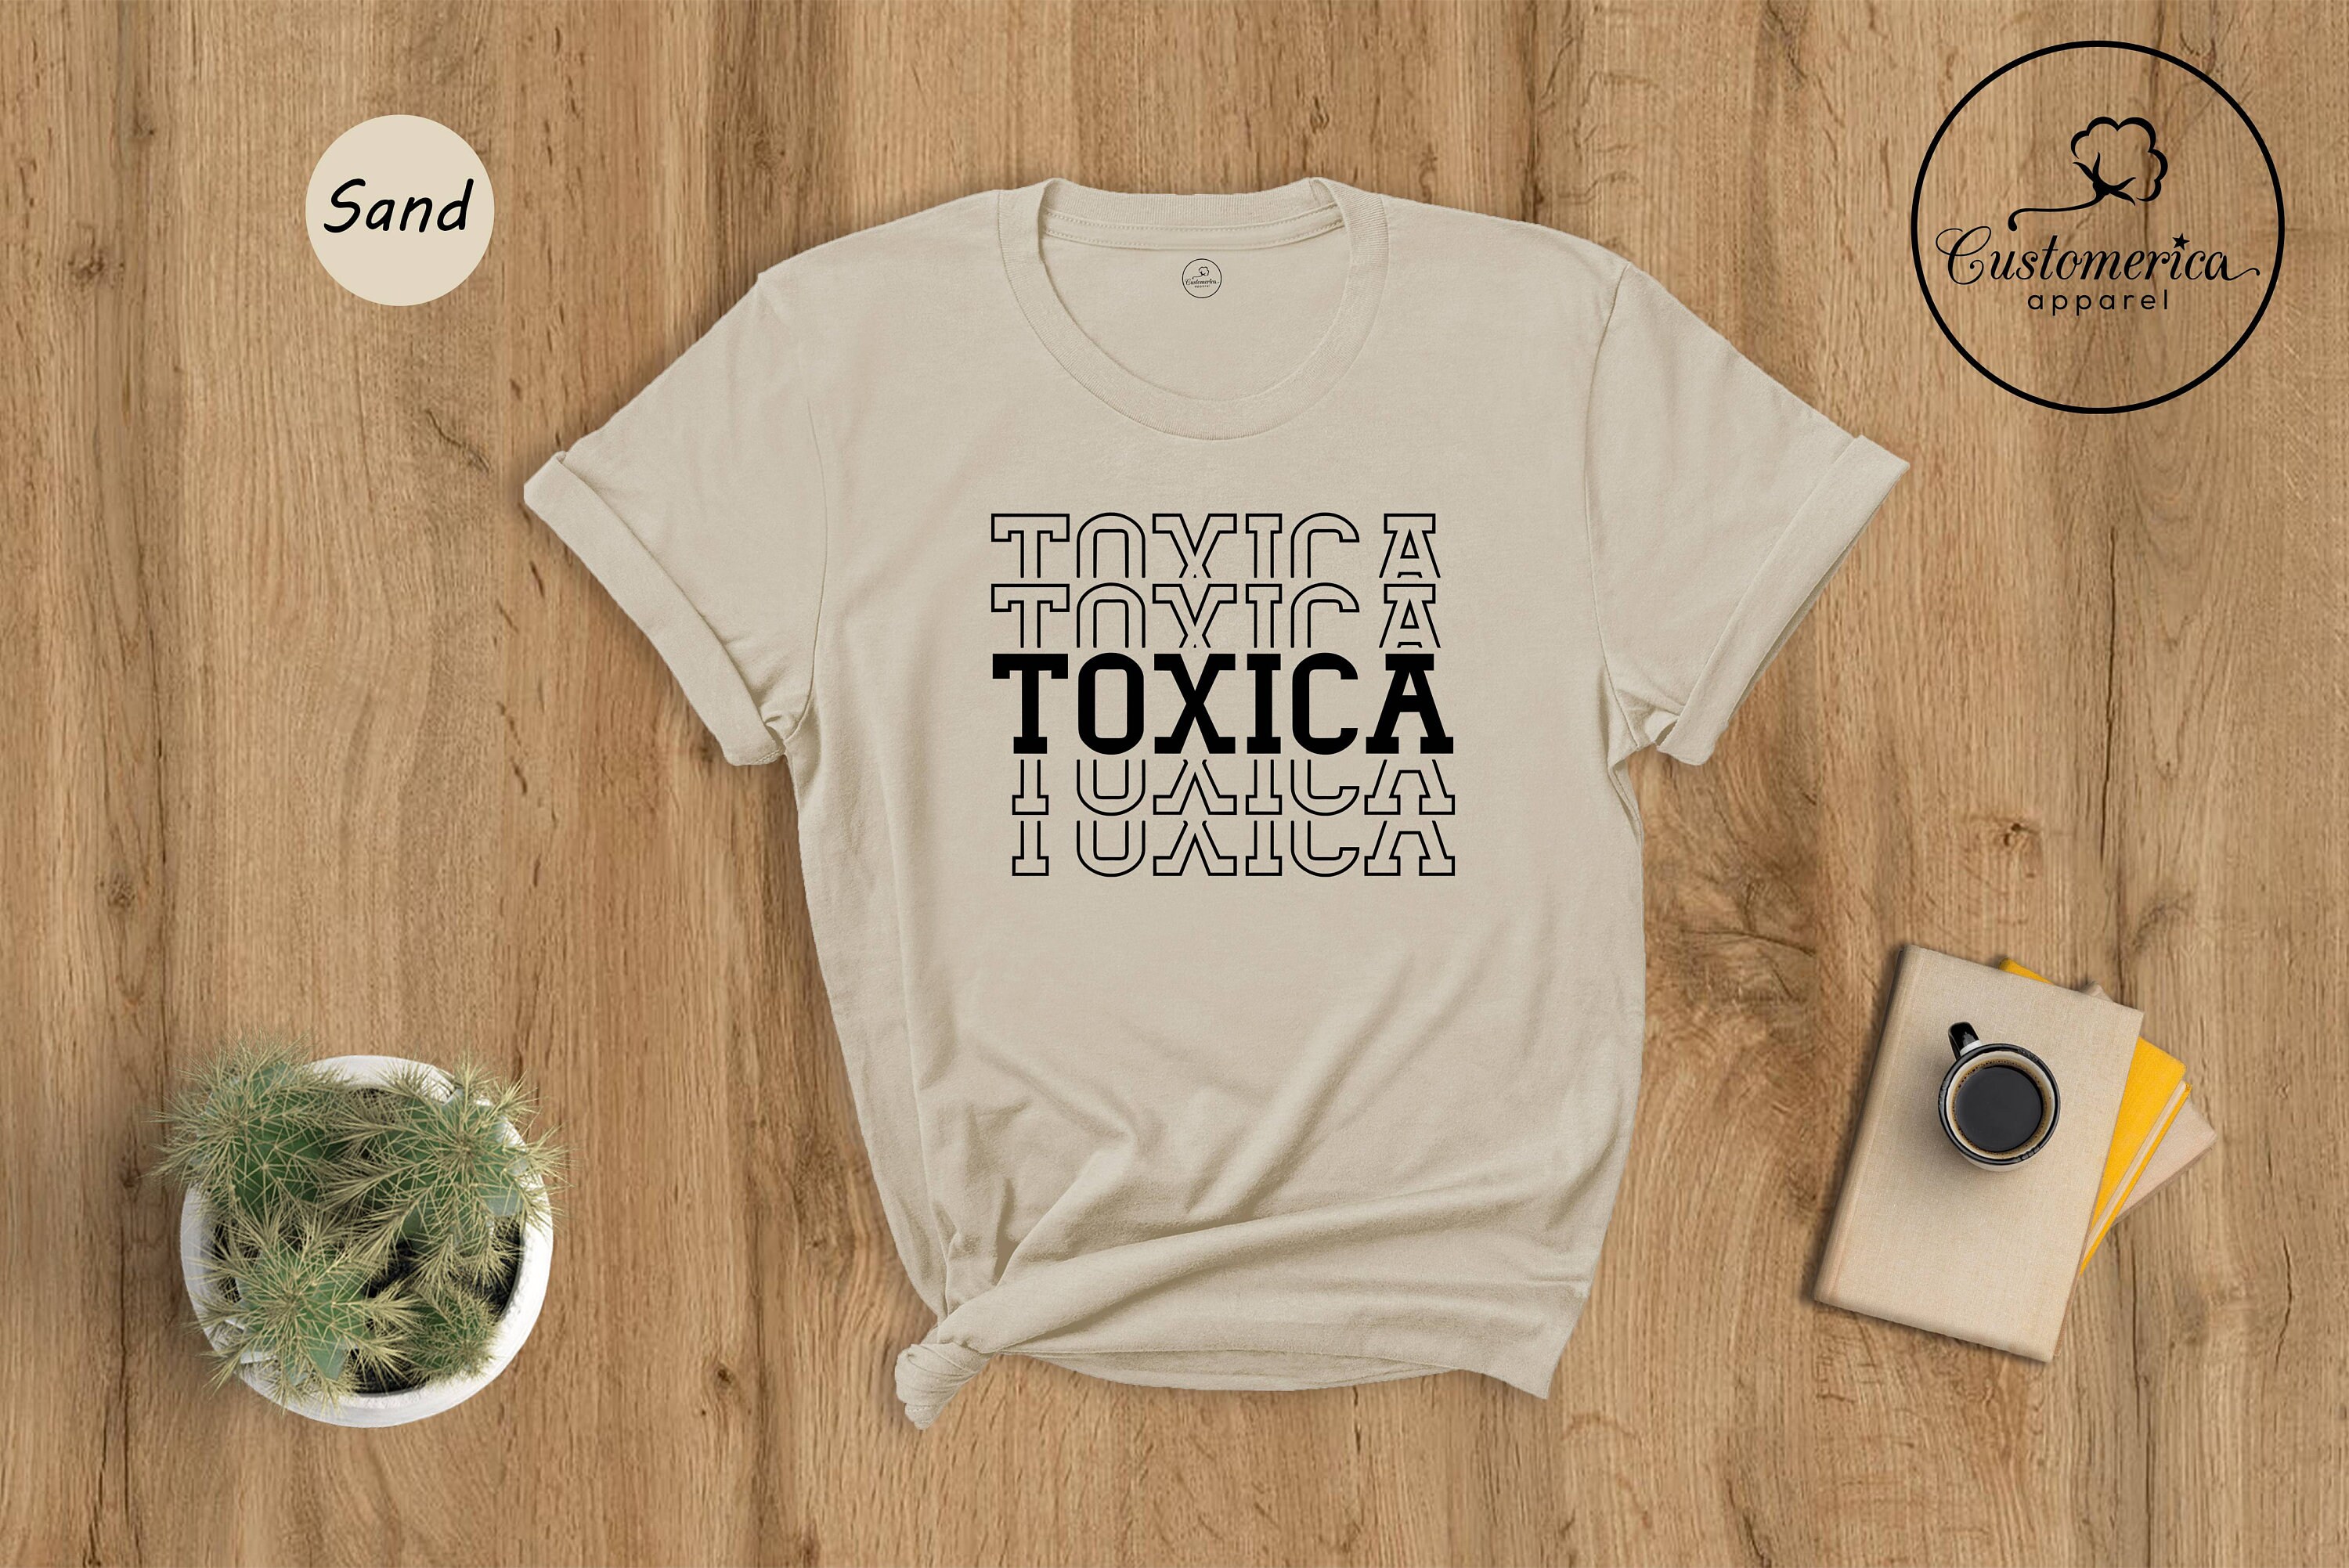  ShirtBANC Matching Toxico y Toxica Shirts for Men and Women  Funny Toxic Tee : Clothing, Shoes & Jewelry